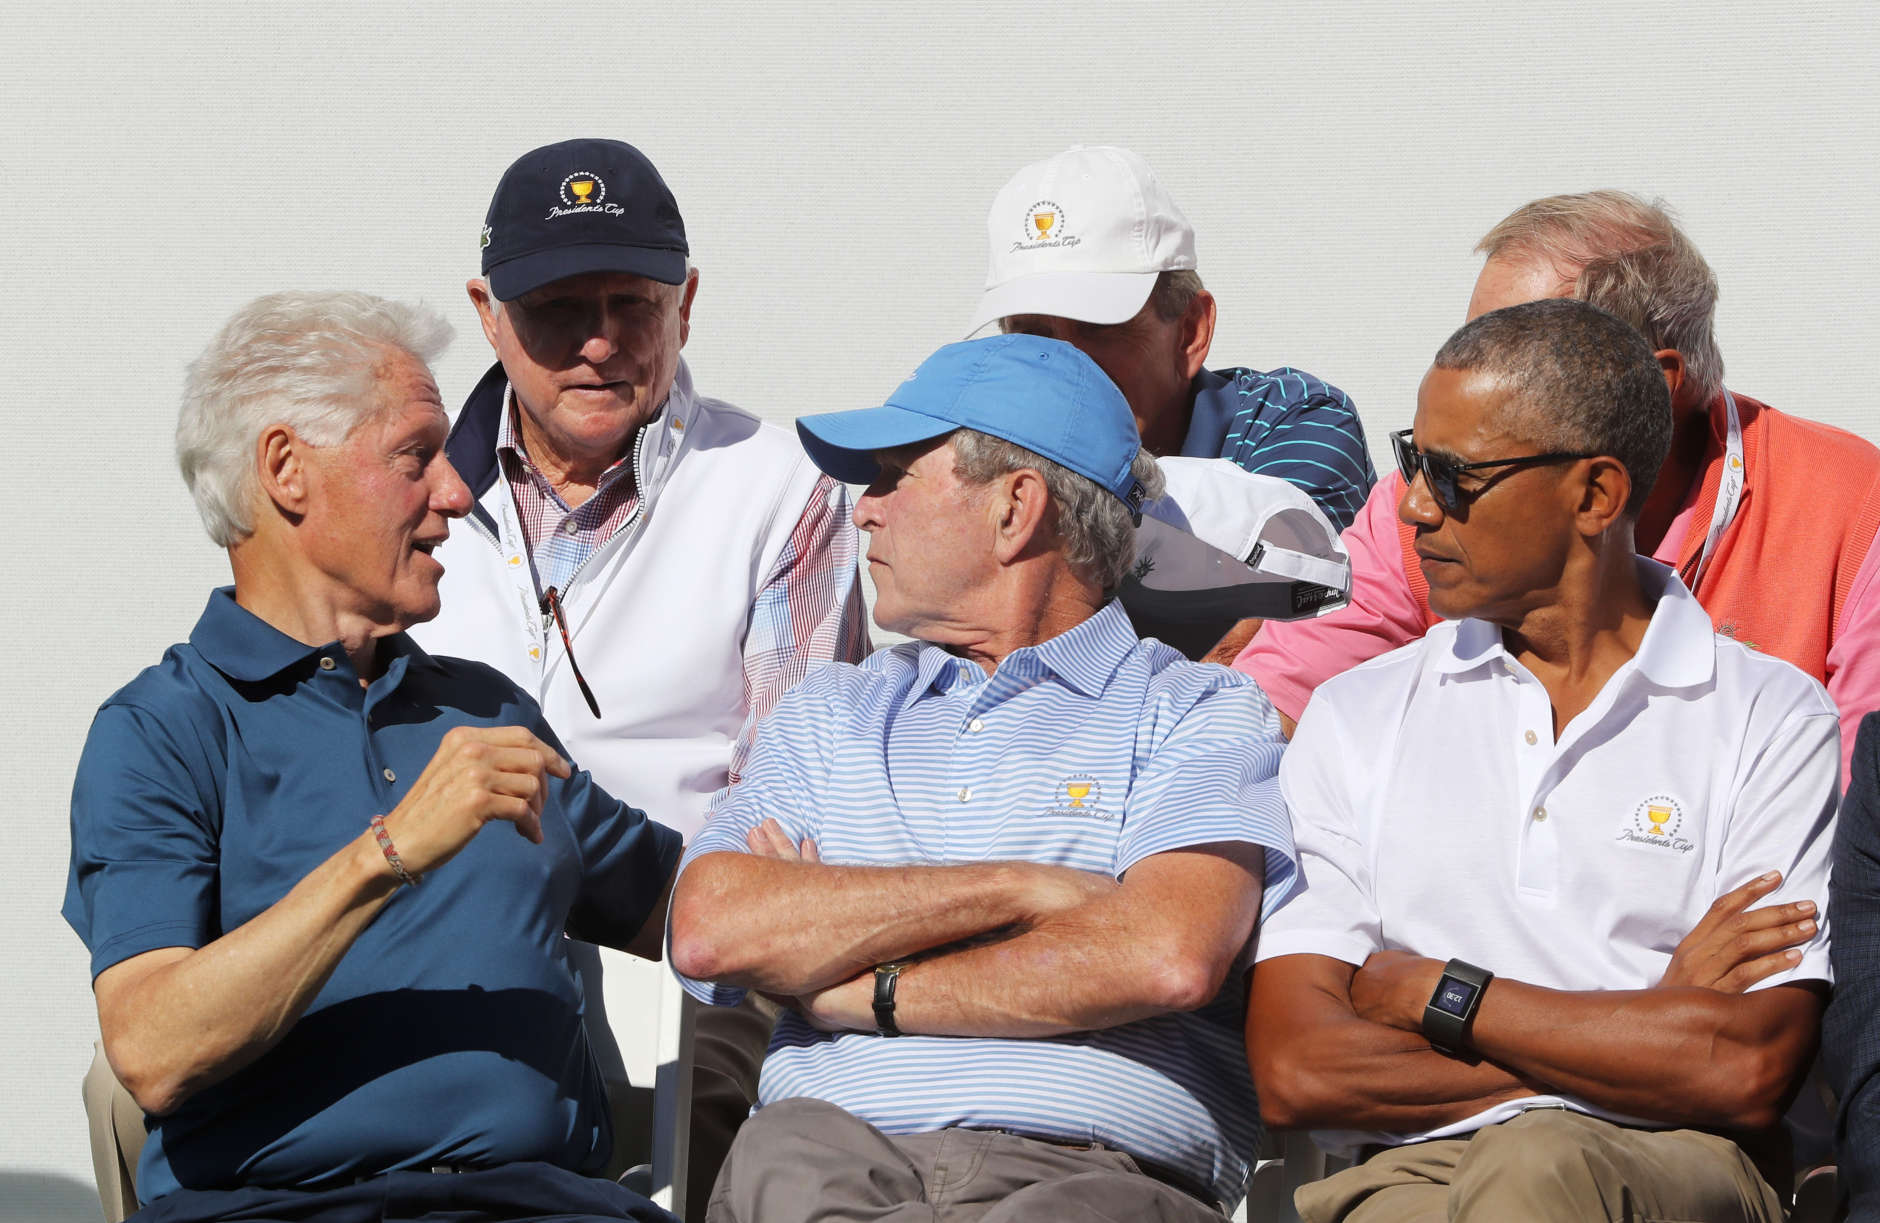 JERSEY CITY, NJ - SEPTEMBER 28:  (L-R) Former U.S. Presidents Bill Clinton, George W. Bush and Barack Obama attend the trophy presentation prior to Thursday foursome matches of the Presidents Cup at Liberty National Golf Club on September 28, 2017 in Jersey City, New Jersey.  (Photo by Sam Greenwood/Getty Images)